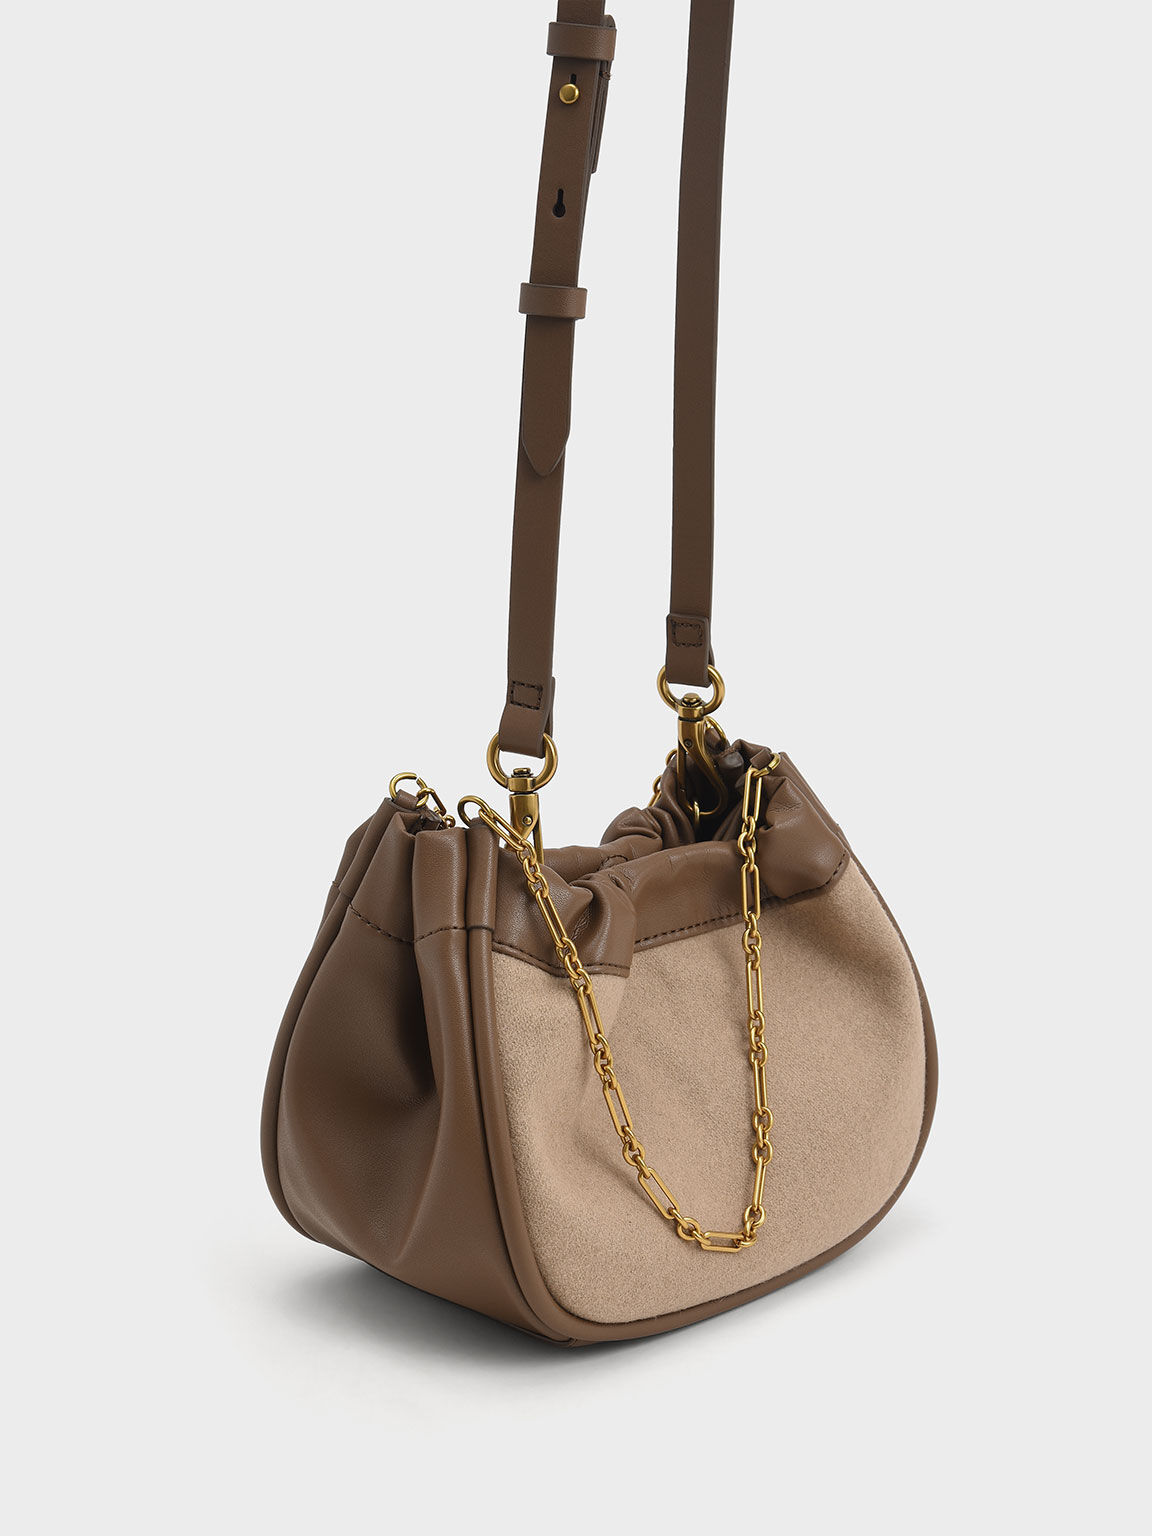 Tas Slouchy Solange Double Chain Handle, Brown, hi-res